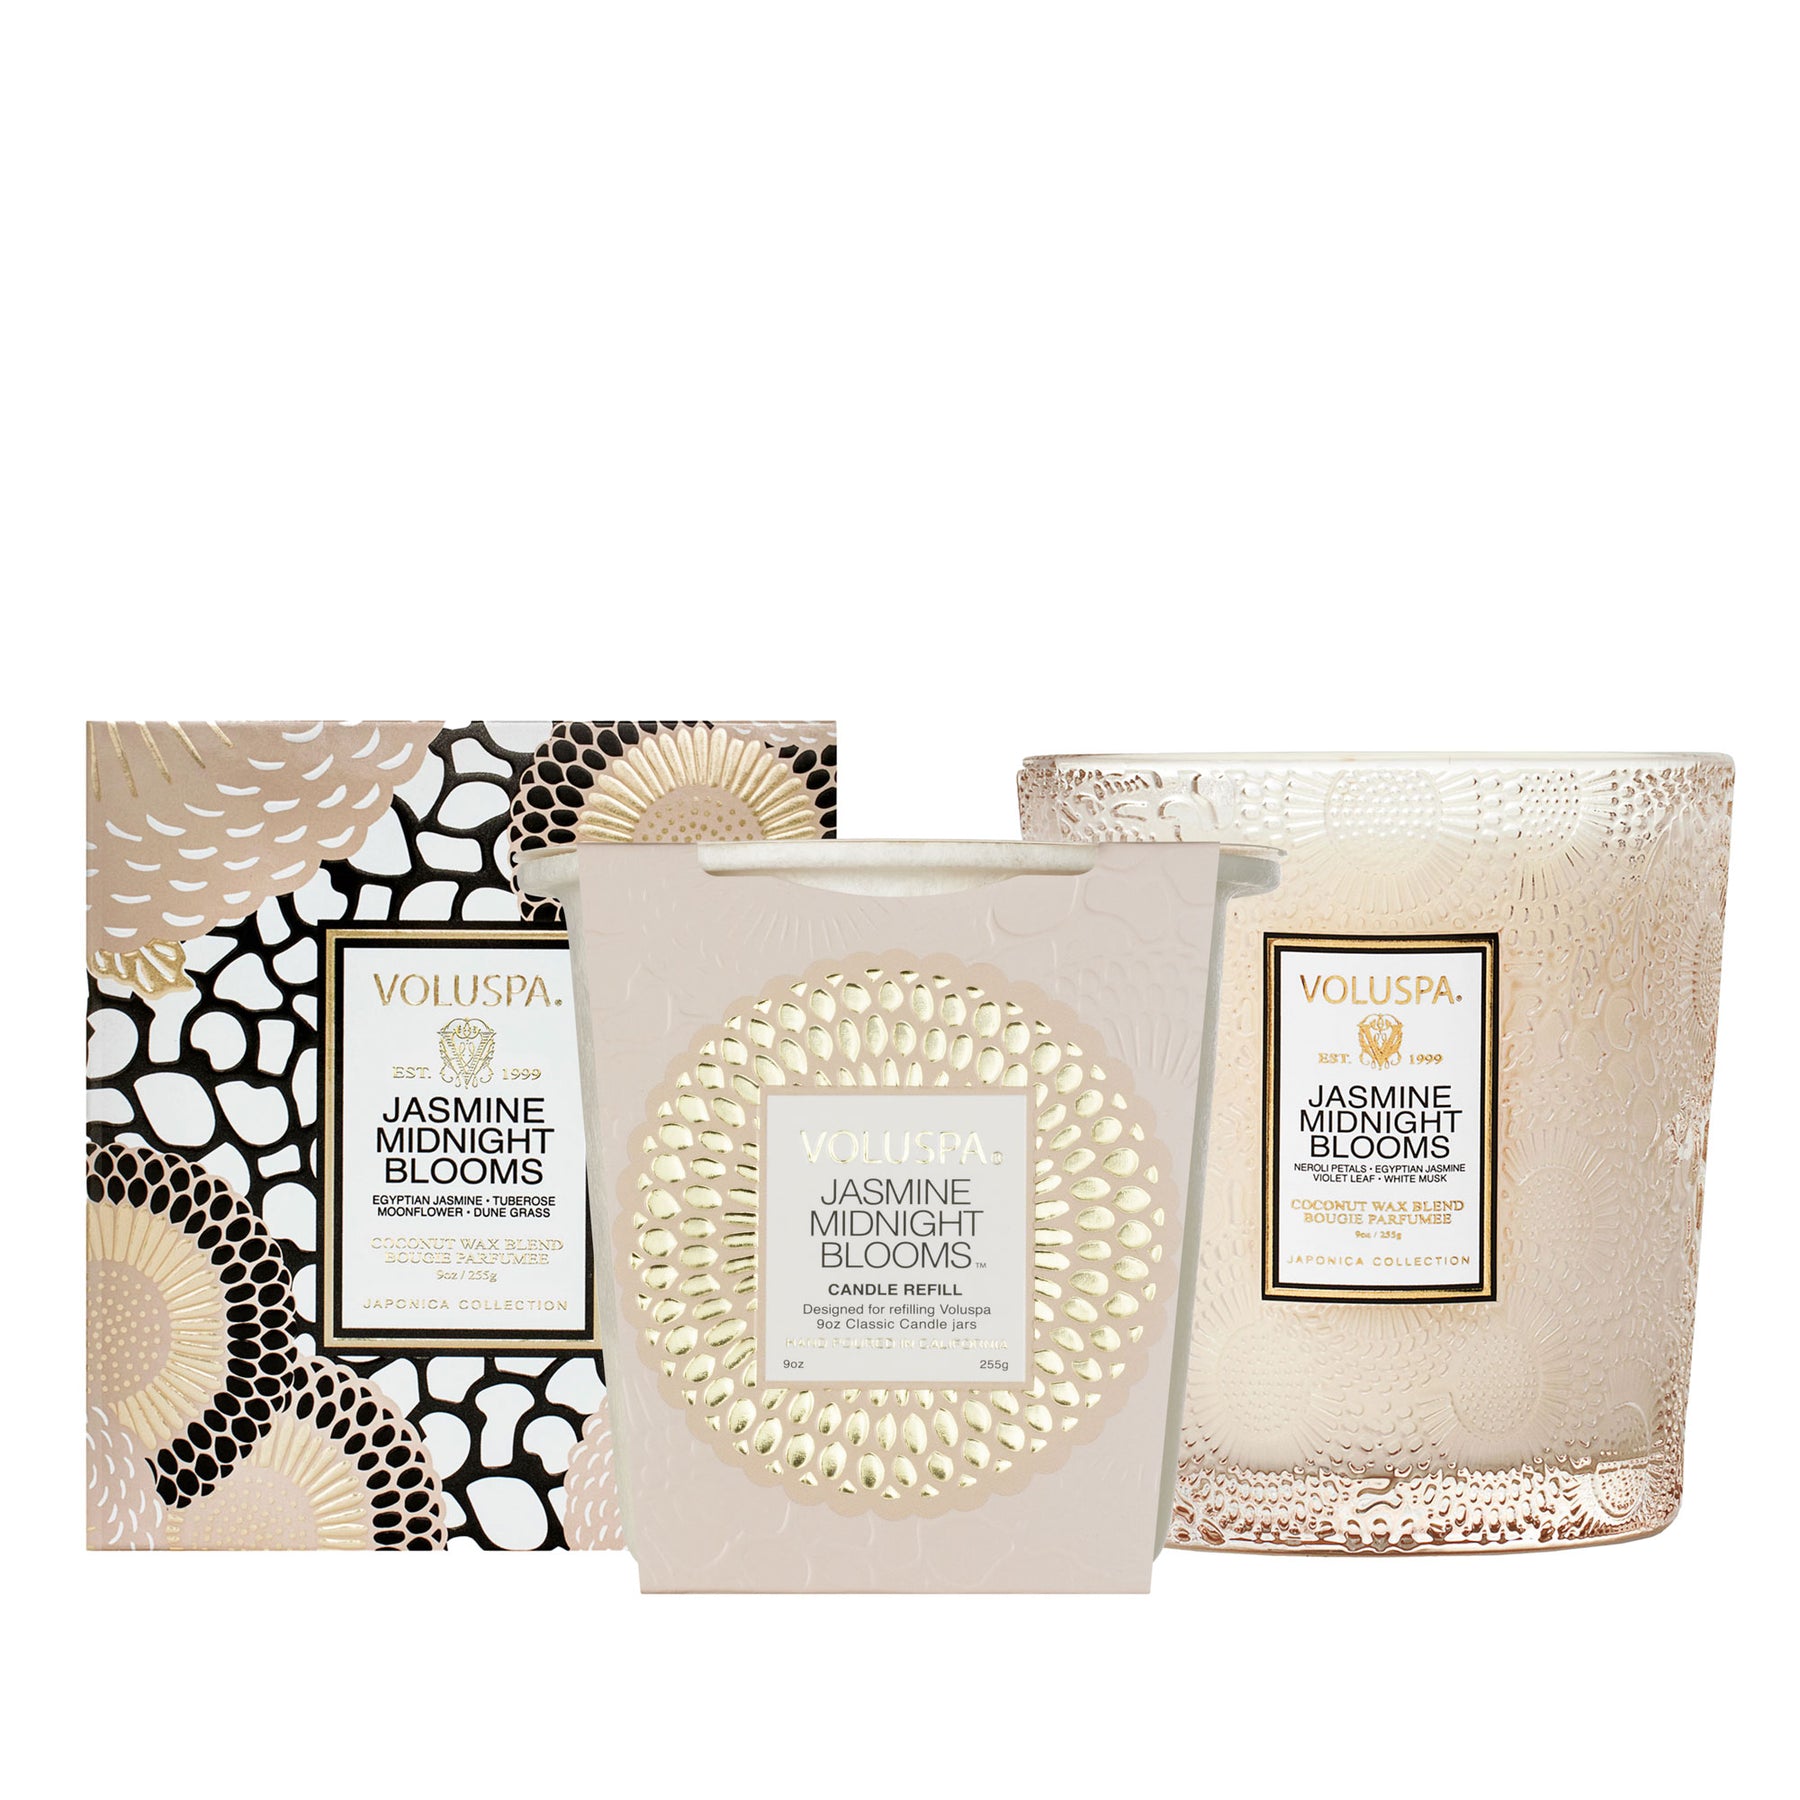 Jasmine Midnight Blooms - Classic Candle & Refill